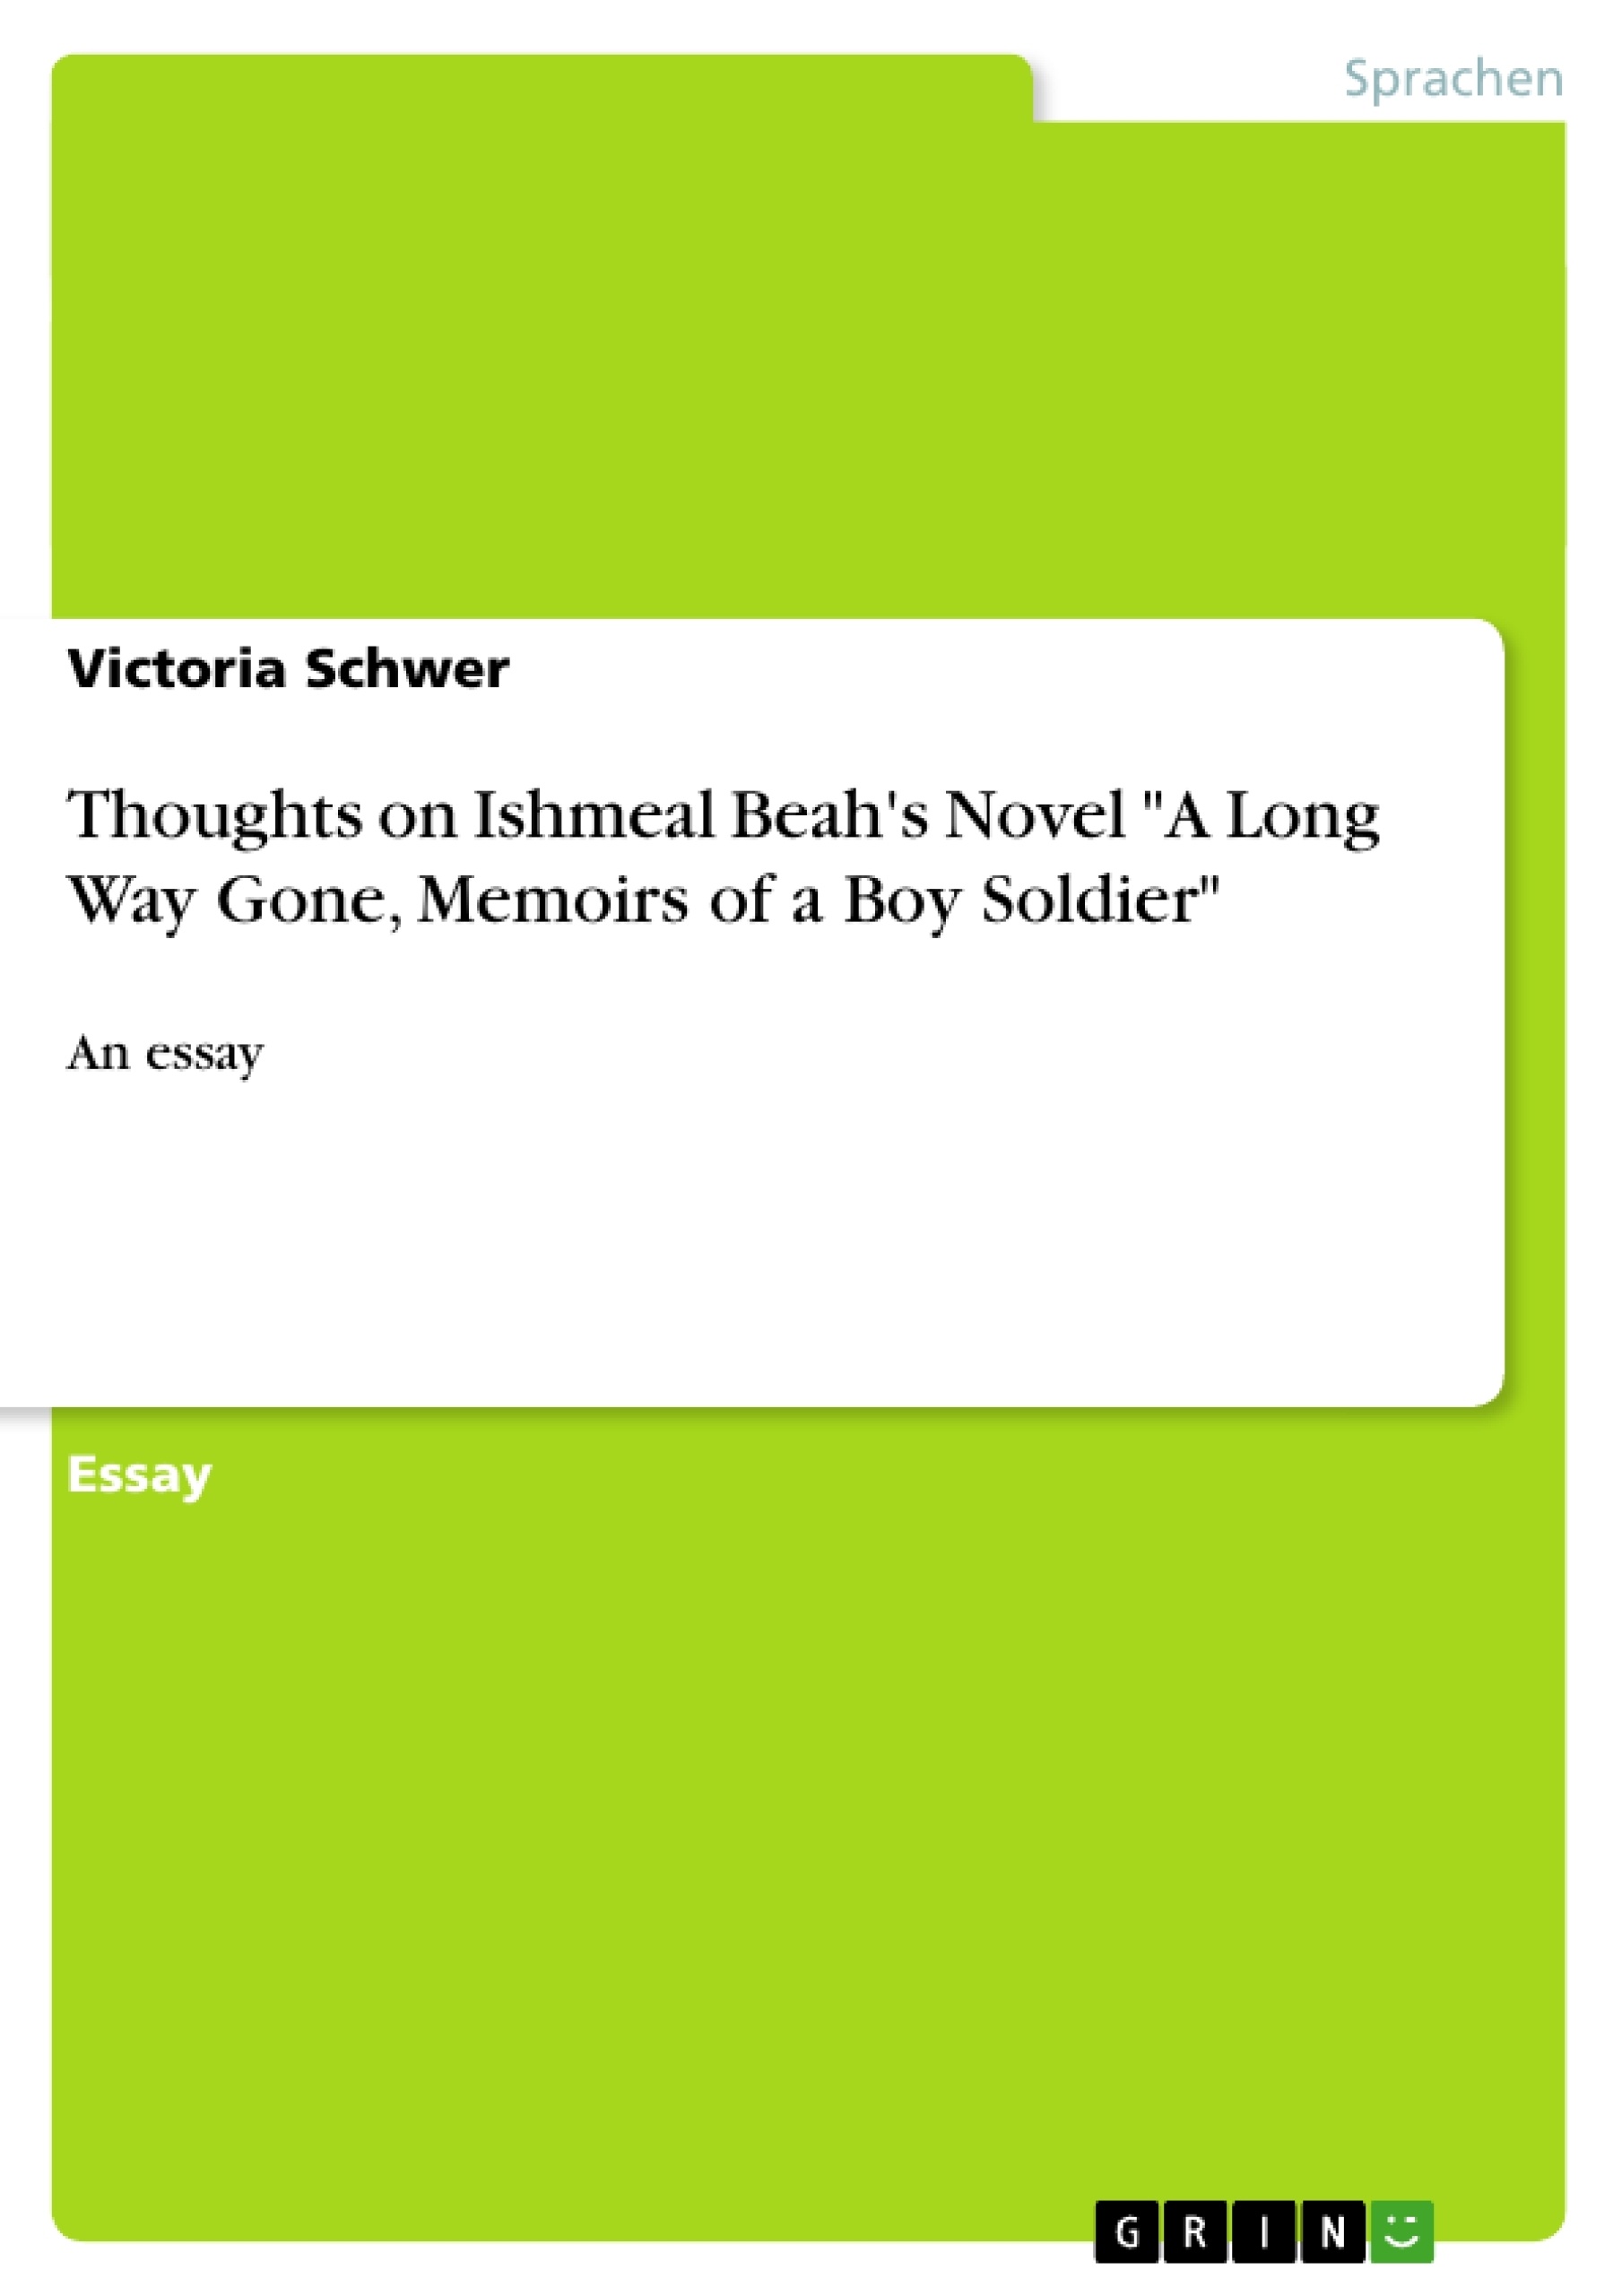 Título: Thoughts on Ishmeal Beah's Novel "A Long Way Gone, Memoirs of a Boy Soldier"